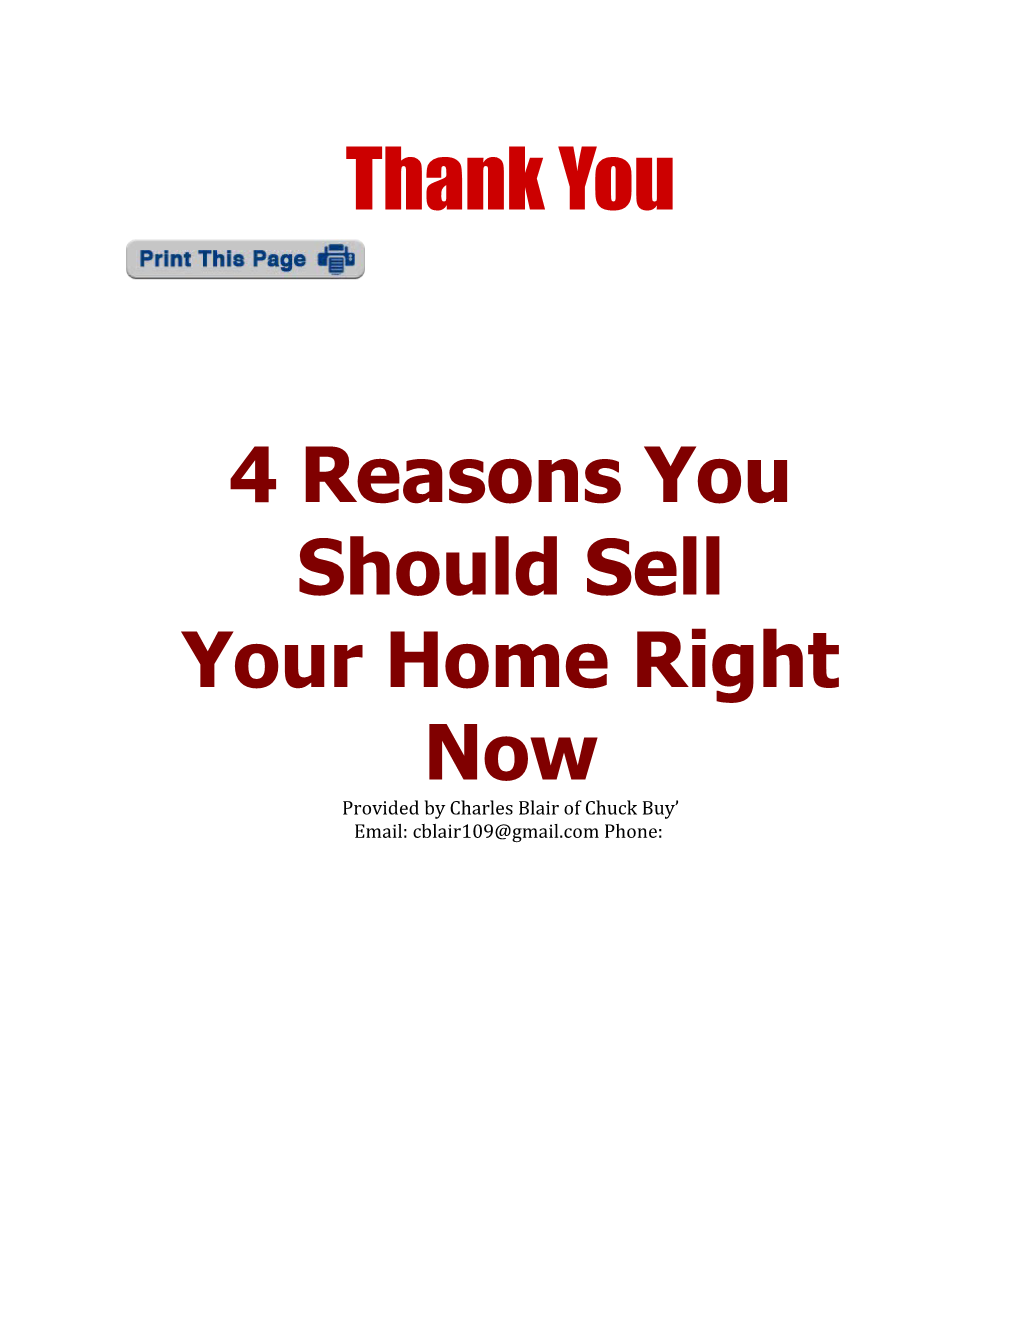 4 Reasons You Should Sell Your Home Right Now